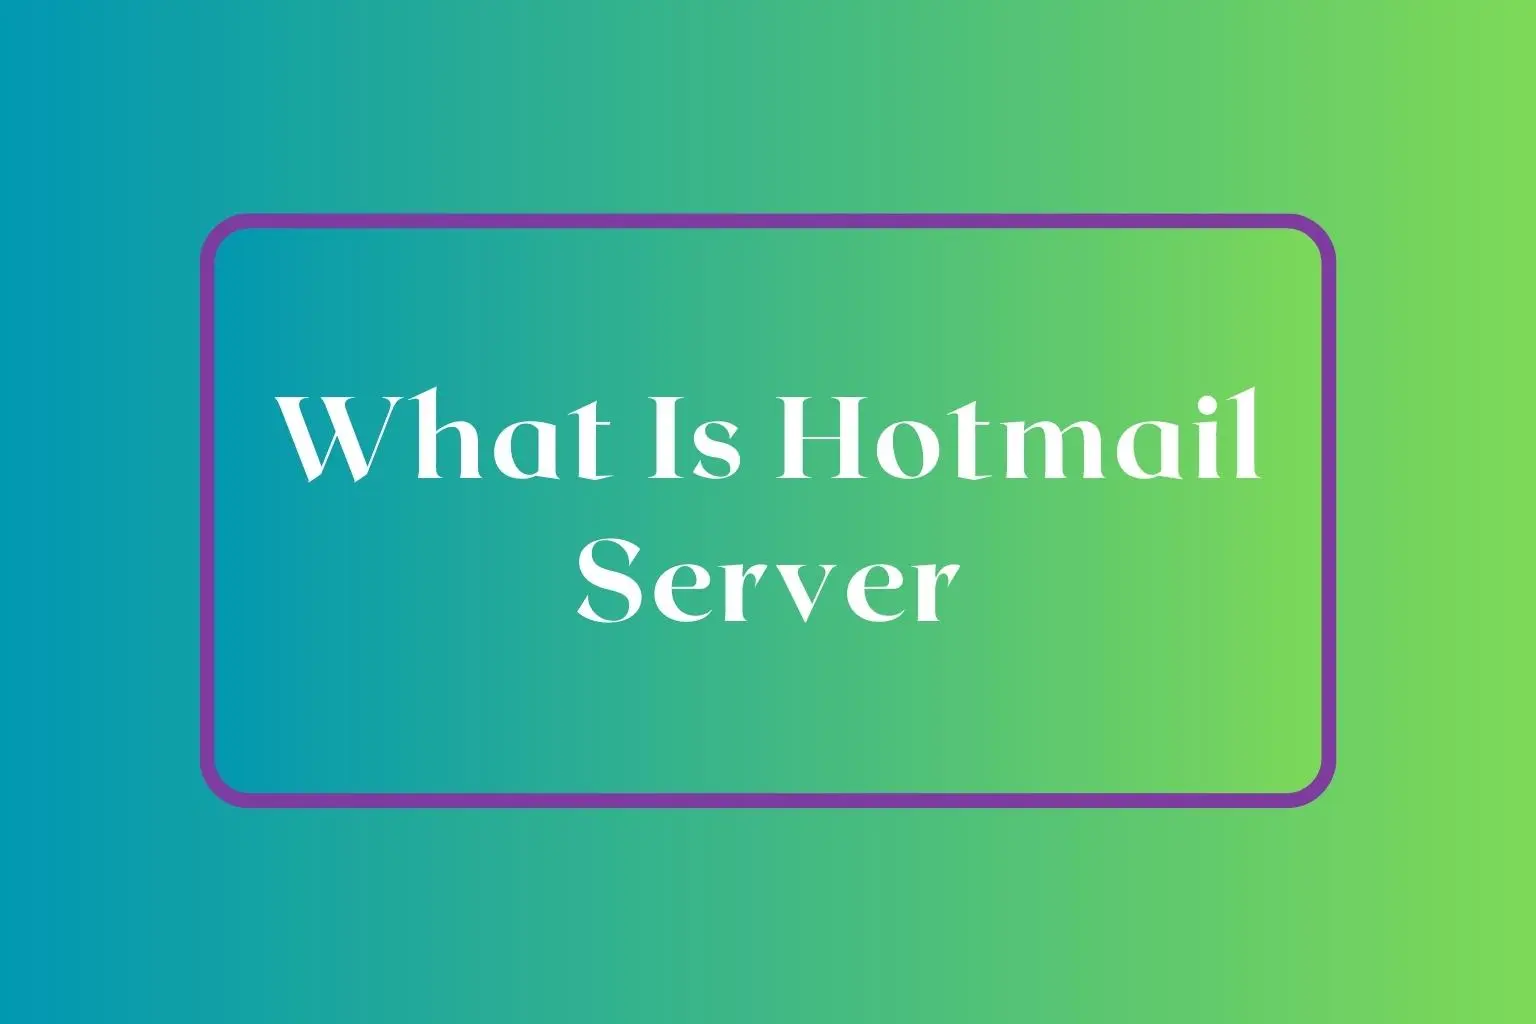 What Is Hotmail Server